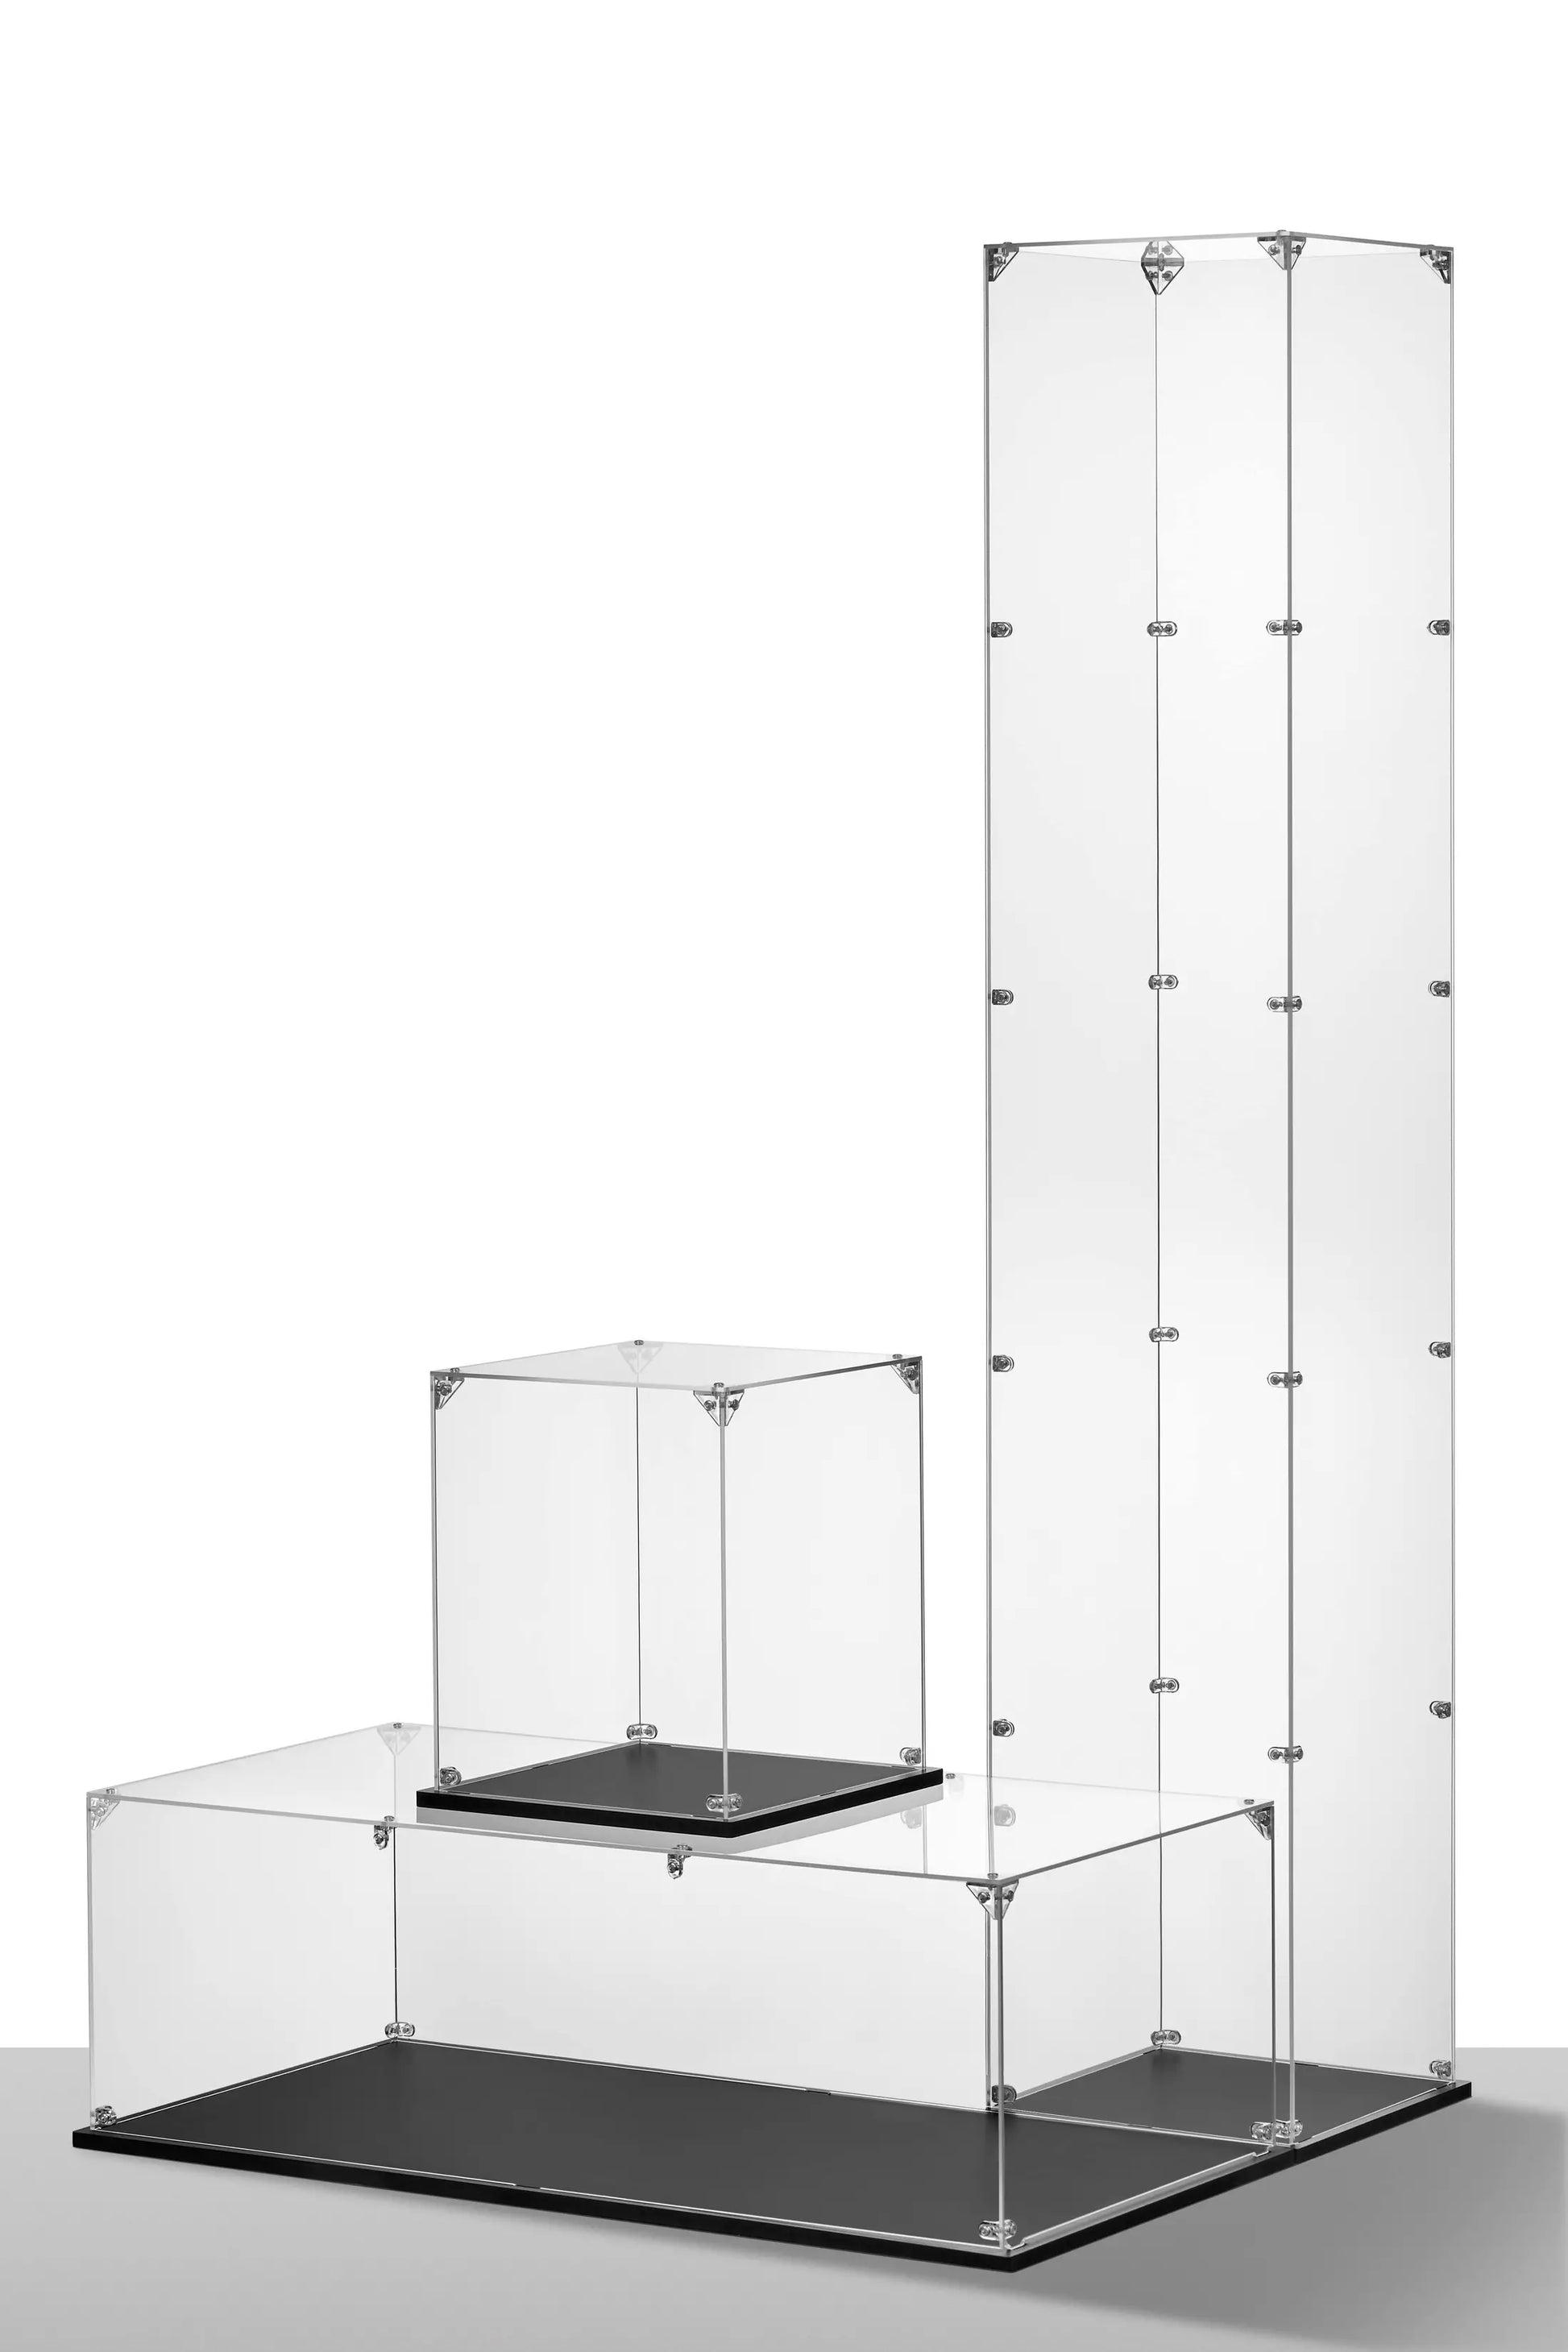 Acrylic Display Case for LEGO Orchid